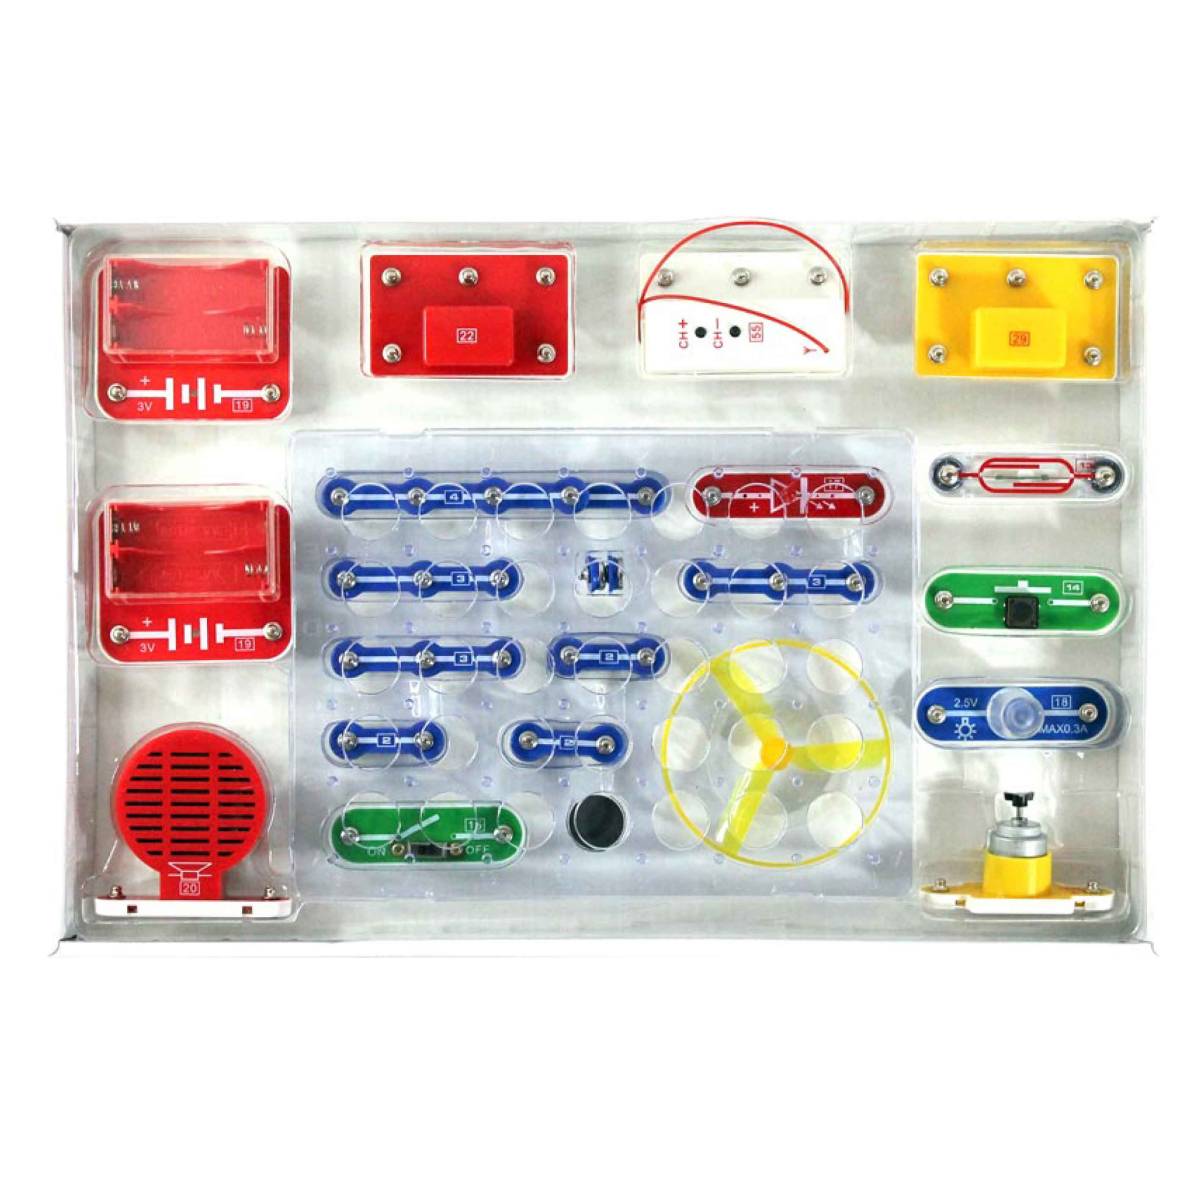 Snap On Electronic Kit, 698-in-1